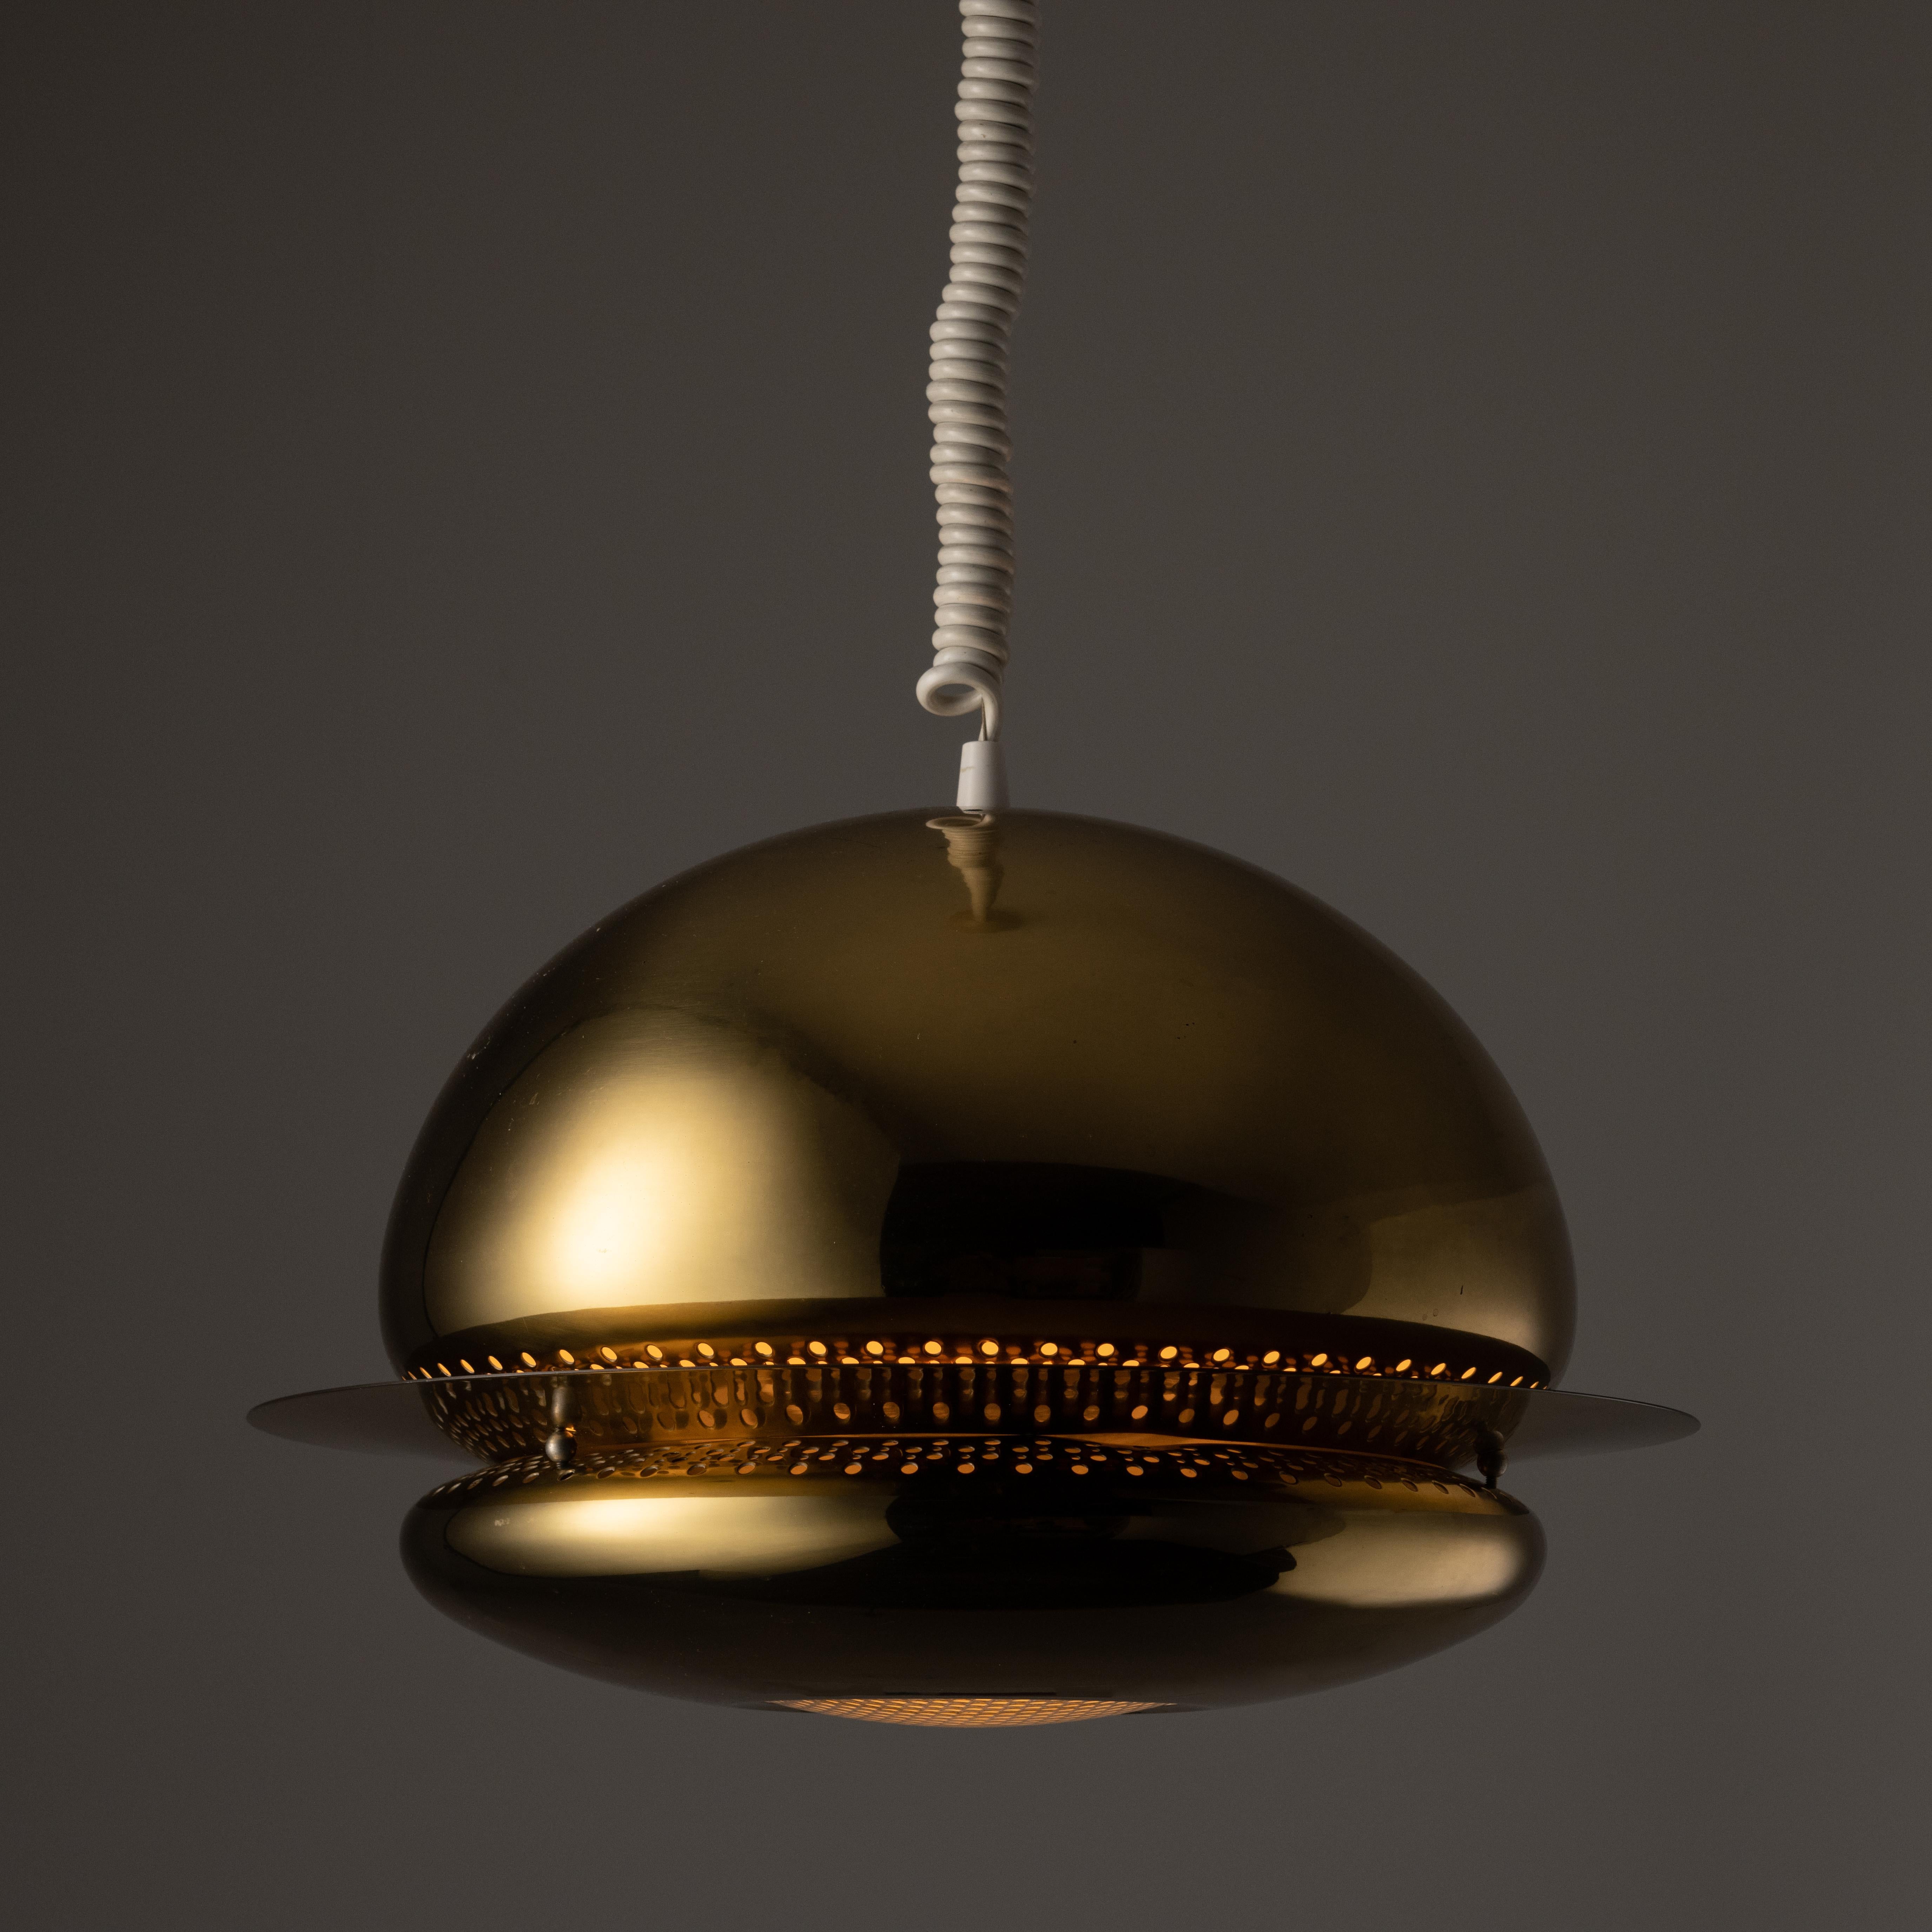 Nictea pendant by Afra and Tobia Scarpa for Flos. A cloud like all polished brass pendant featuring a bulbous top and bottom shade, sandwiched in-between a perforated brass ring. The ring allows for a beautiful starry illumination towards the